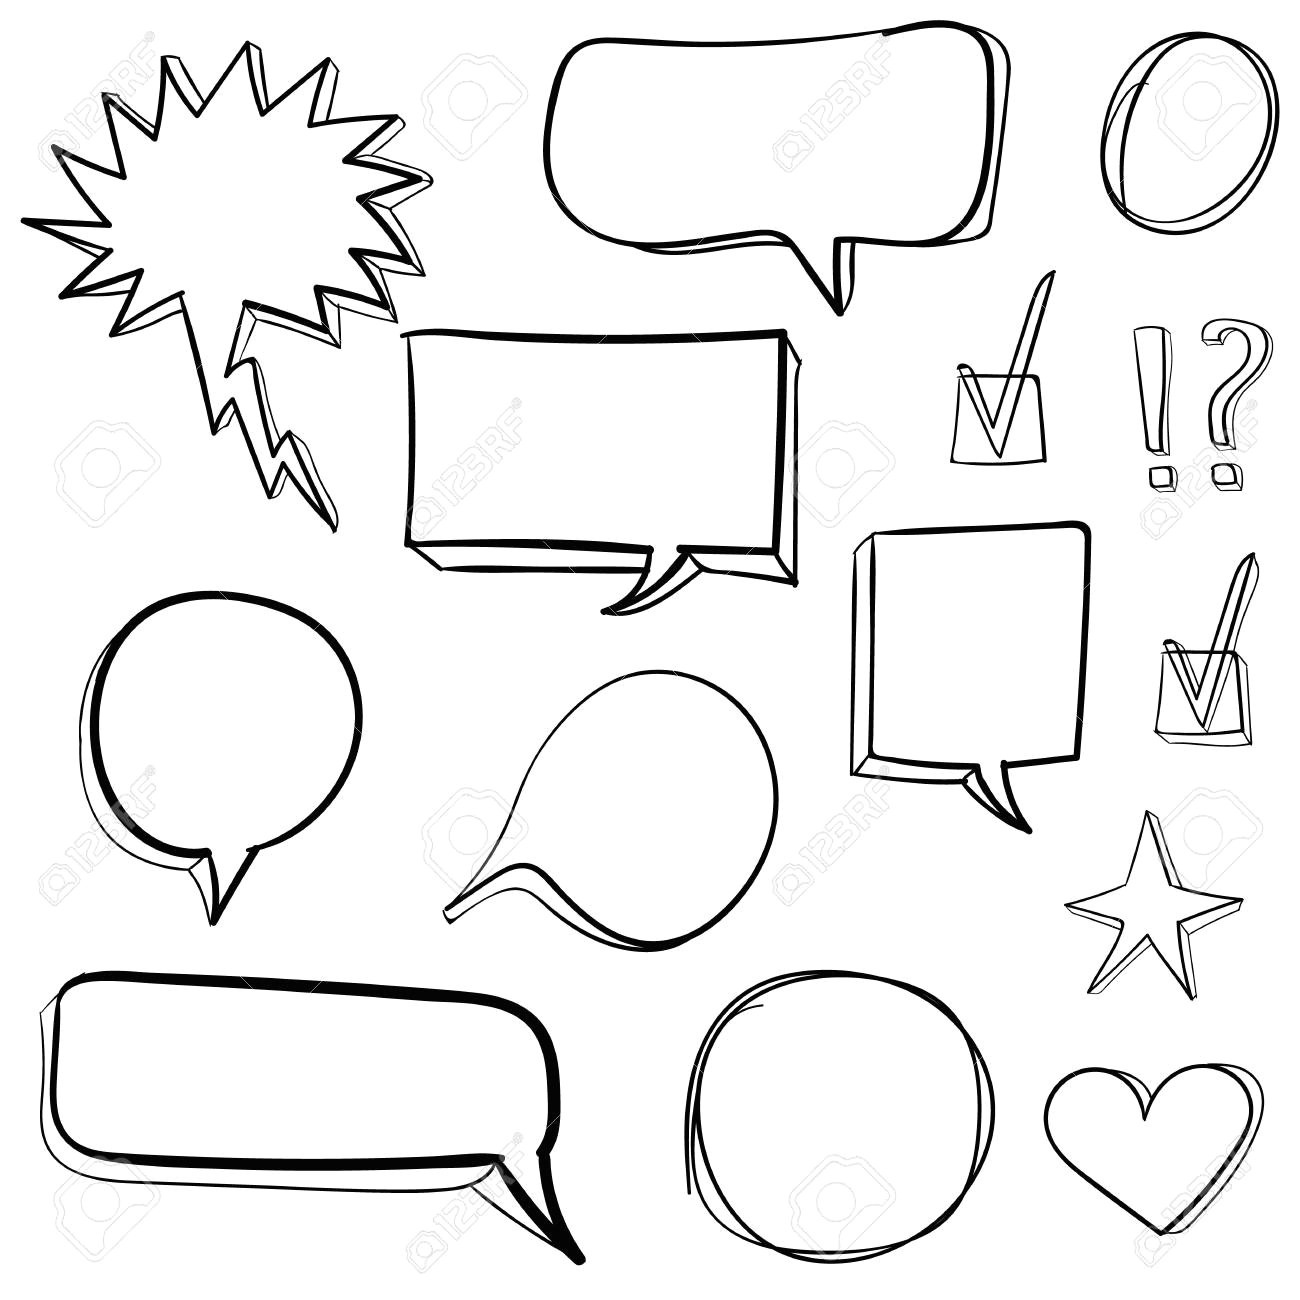 Outline Drawing Of A Heart Set Od 3d Hand Drawn Icons Check Mark Star Heart Speech Bubbles